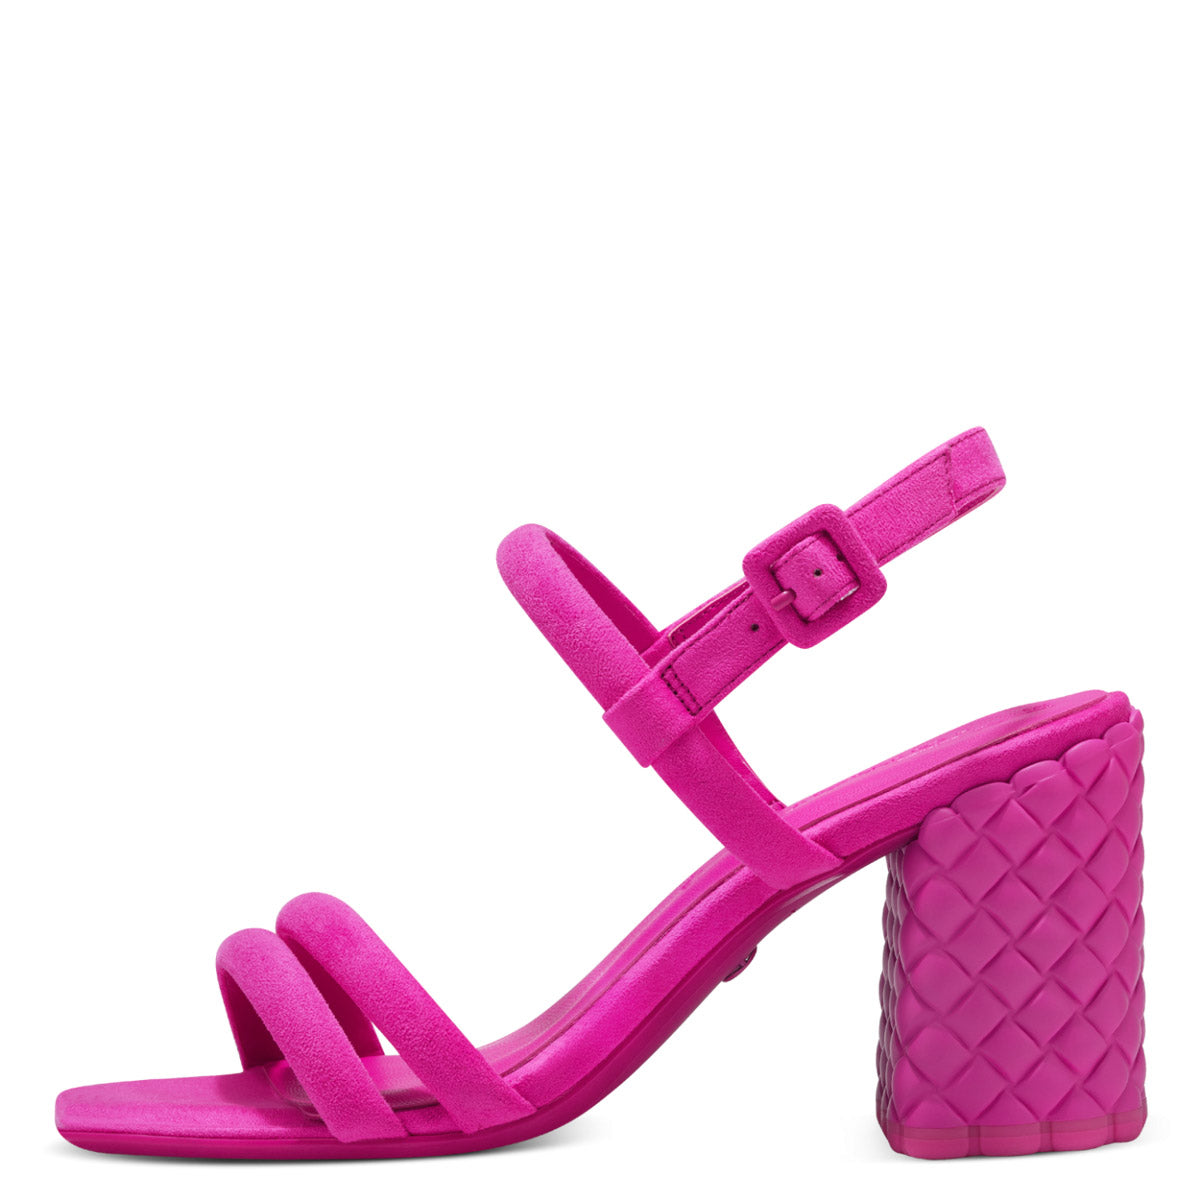 Bold Hot Pink Faux Suede Sandals for Special Events